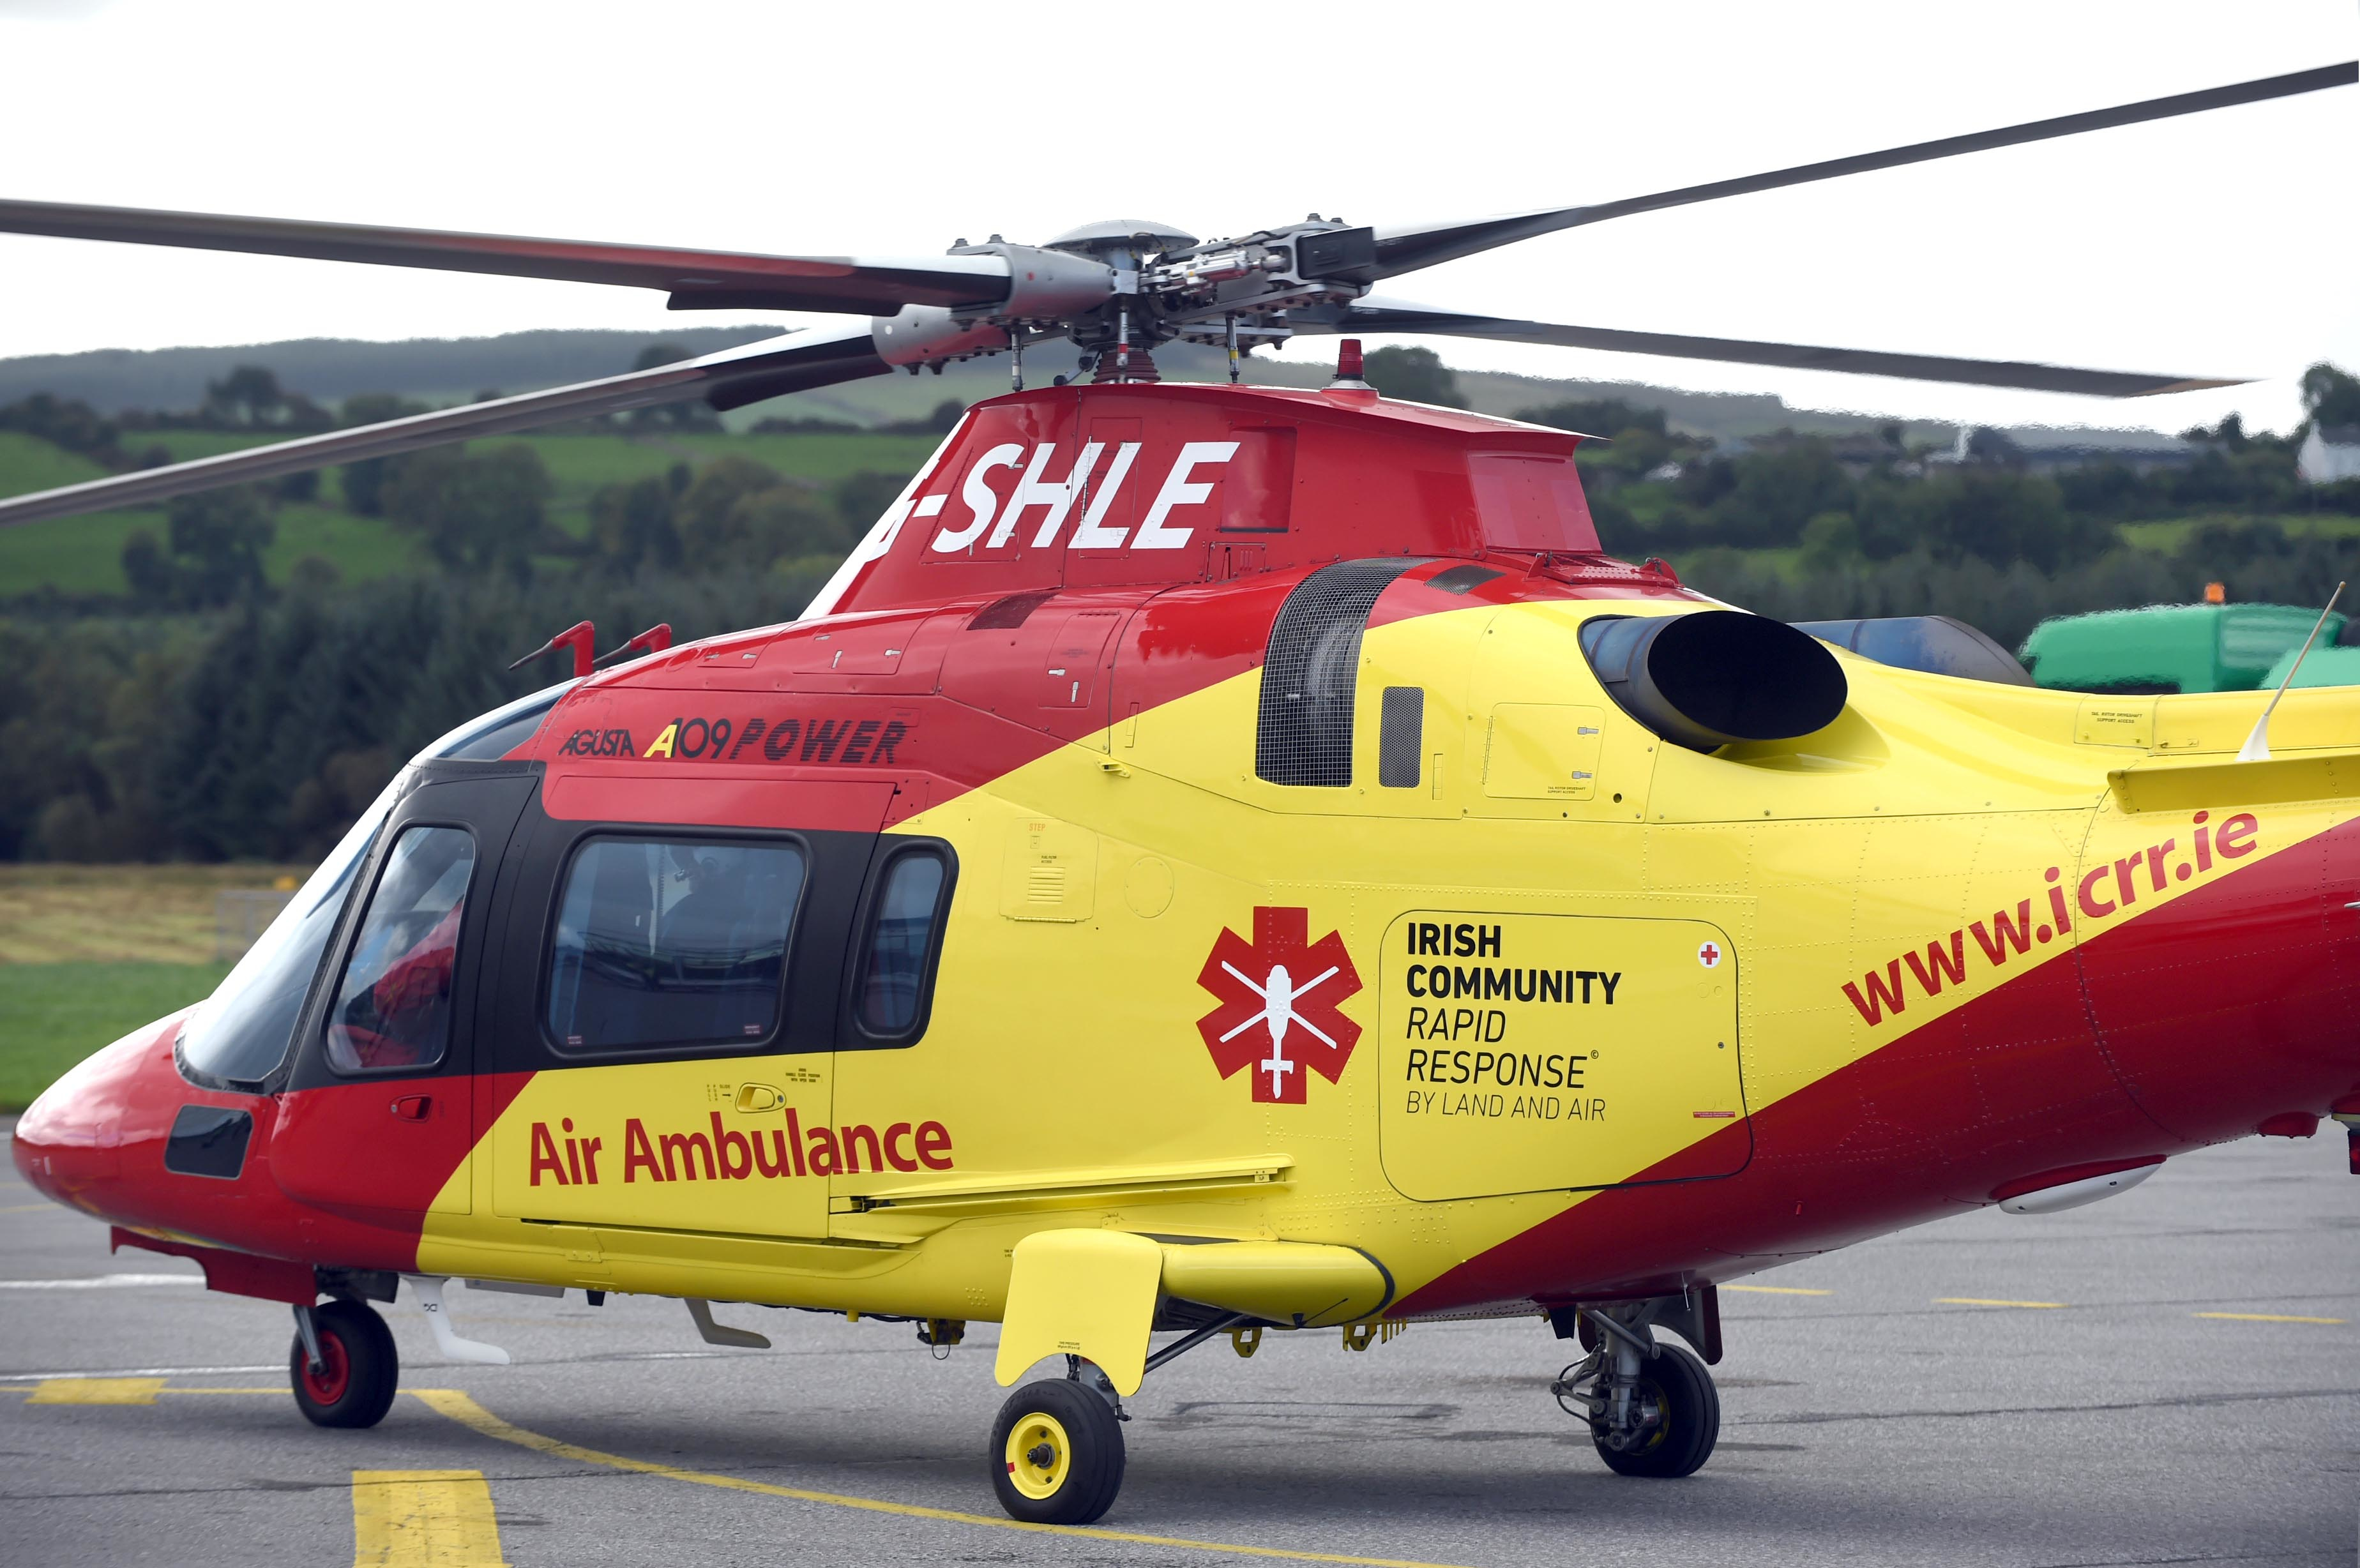 air-ambulance-one-step-closer-says-cork-based-director-thecork-ie